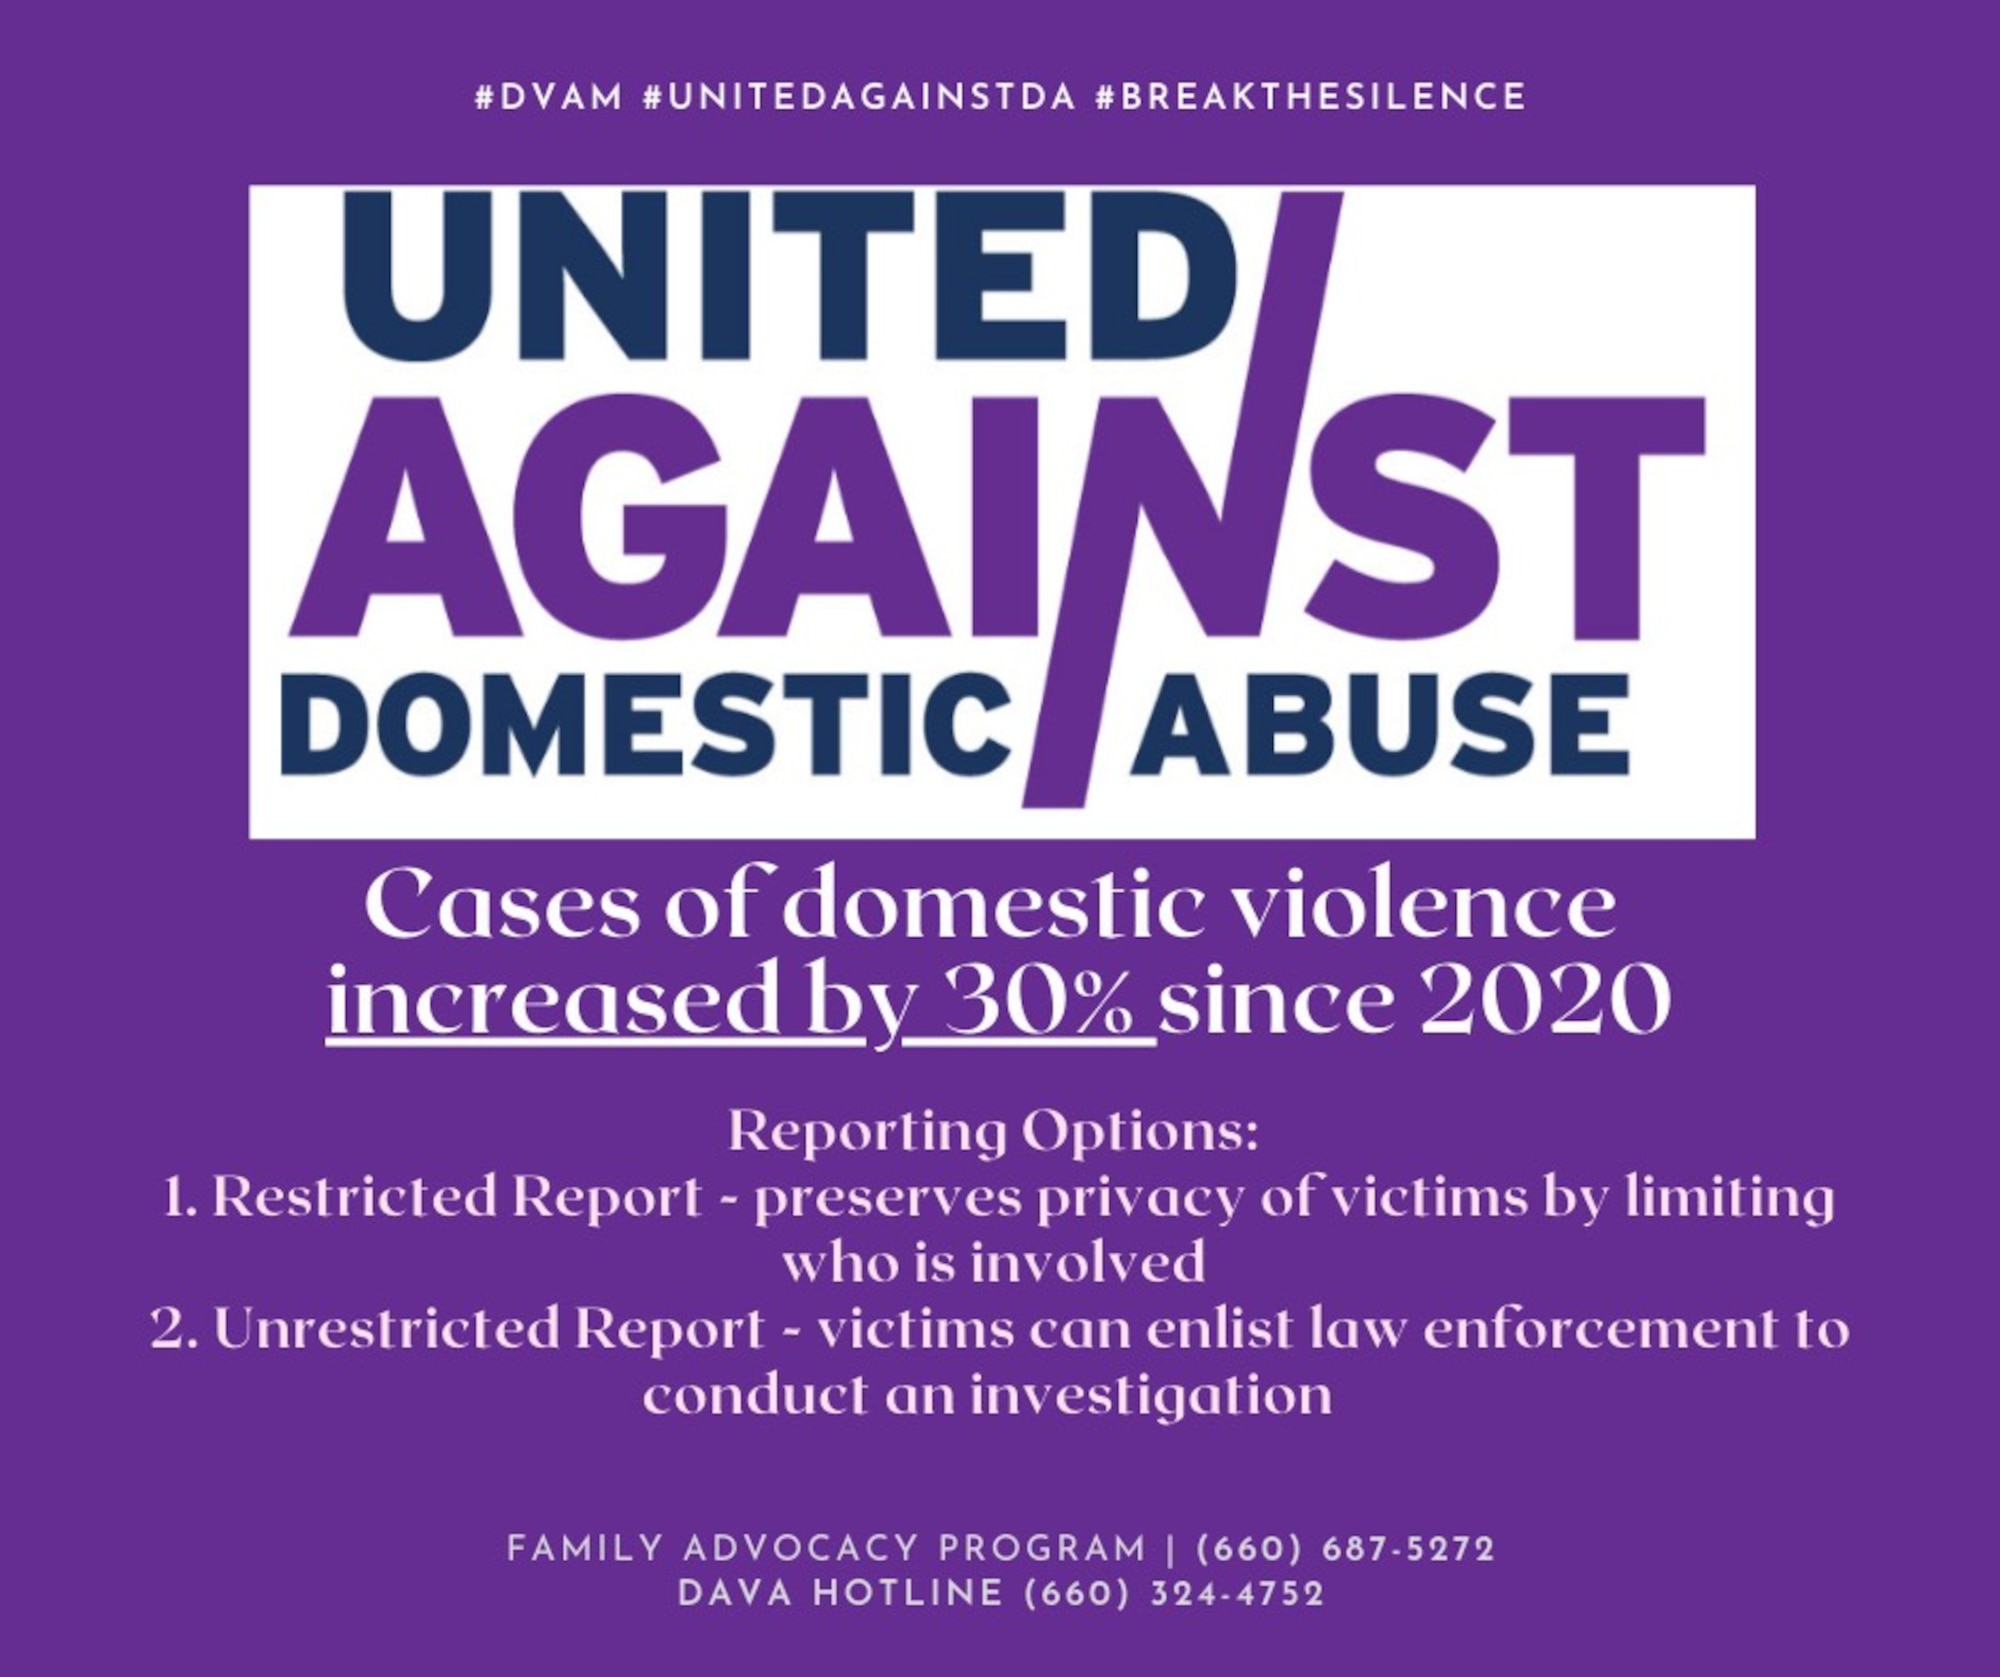 Cases of domestic violence increased by 30% since 2020.